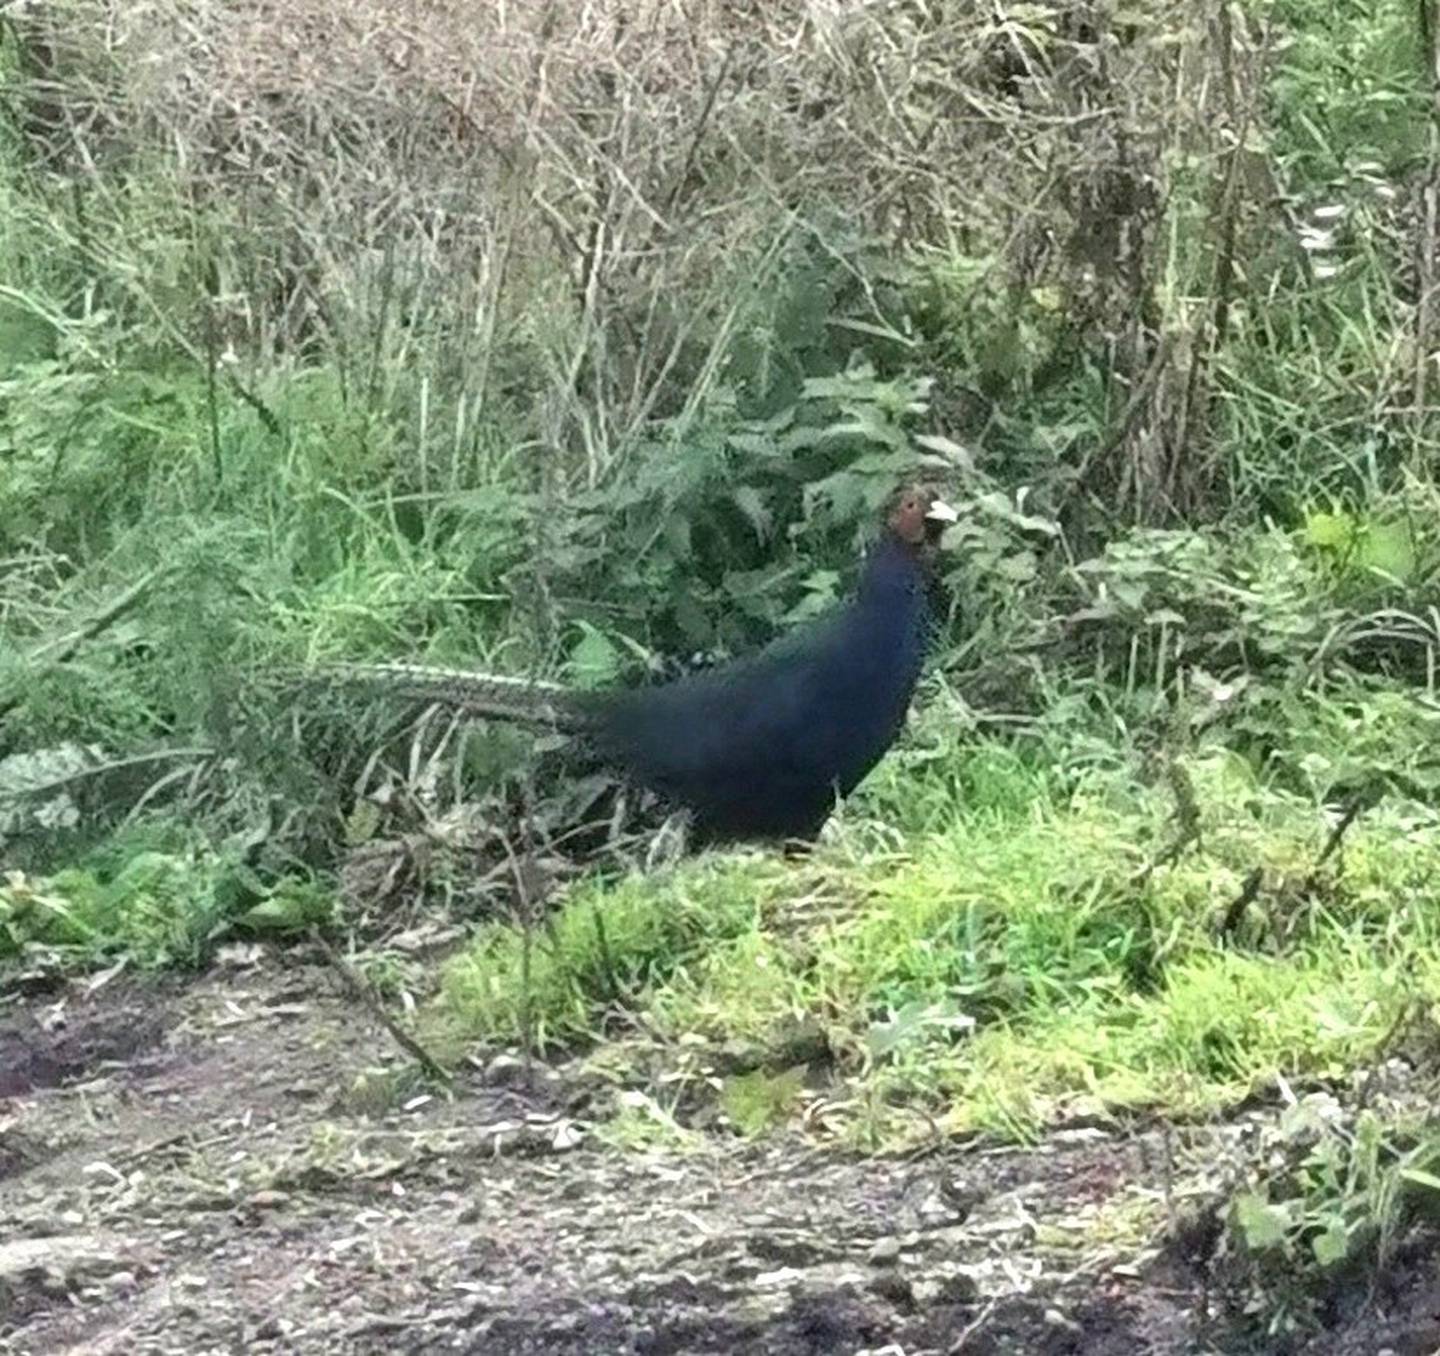 I saw a black pheasant recently. Are they rare, as I've never spotted one before?
Louise Cribbin Dublin 18
This pheasant is a melanistic individual, most likely released as part of a captive-reared batch for hunting purposes. Niall Hatch of Birdwatch Ireland says that inbreeding is quite common in captive pheasant stocks, which can lead to a greater chance of genetic abnormalities. White pheasants are quite often reported, but these melanistic birds are seen occasionally too.